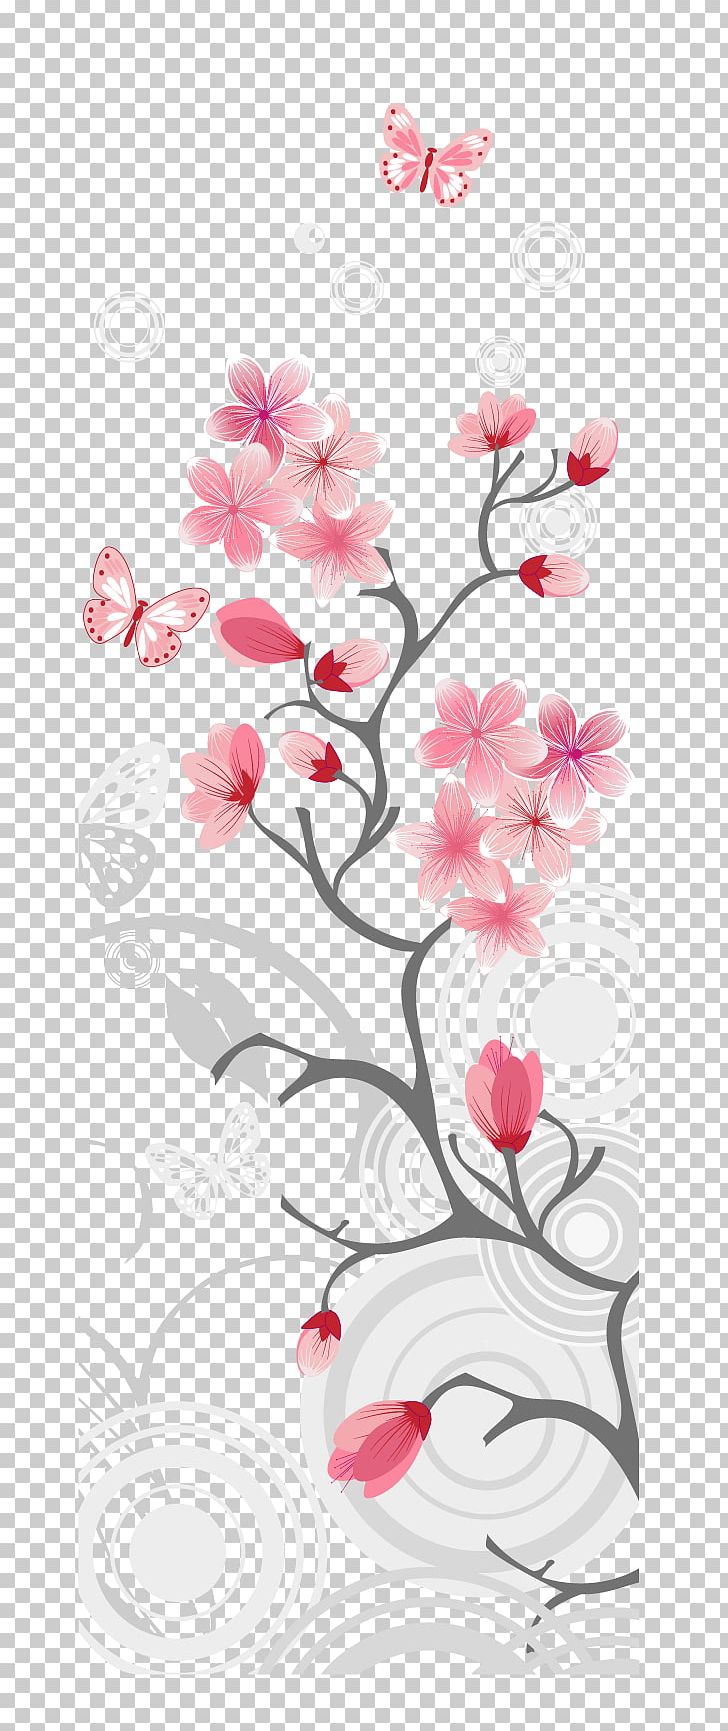 Cherry Blossom Illustration PNG, Clipart, Blossom, Blossom Vector, Branch, Cherry, Encapsulated Postscript Free PNG Download